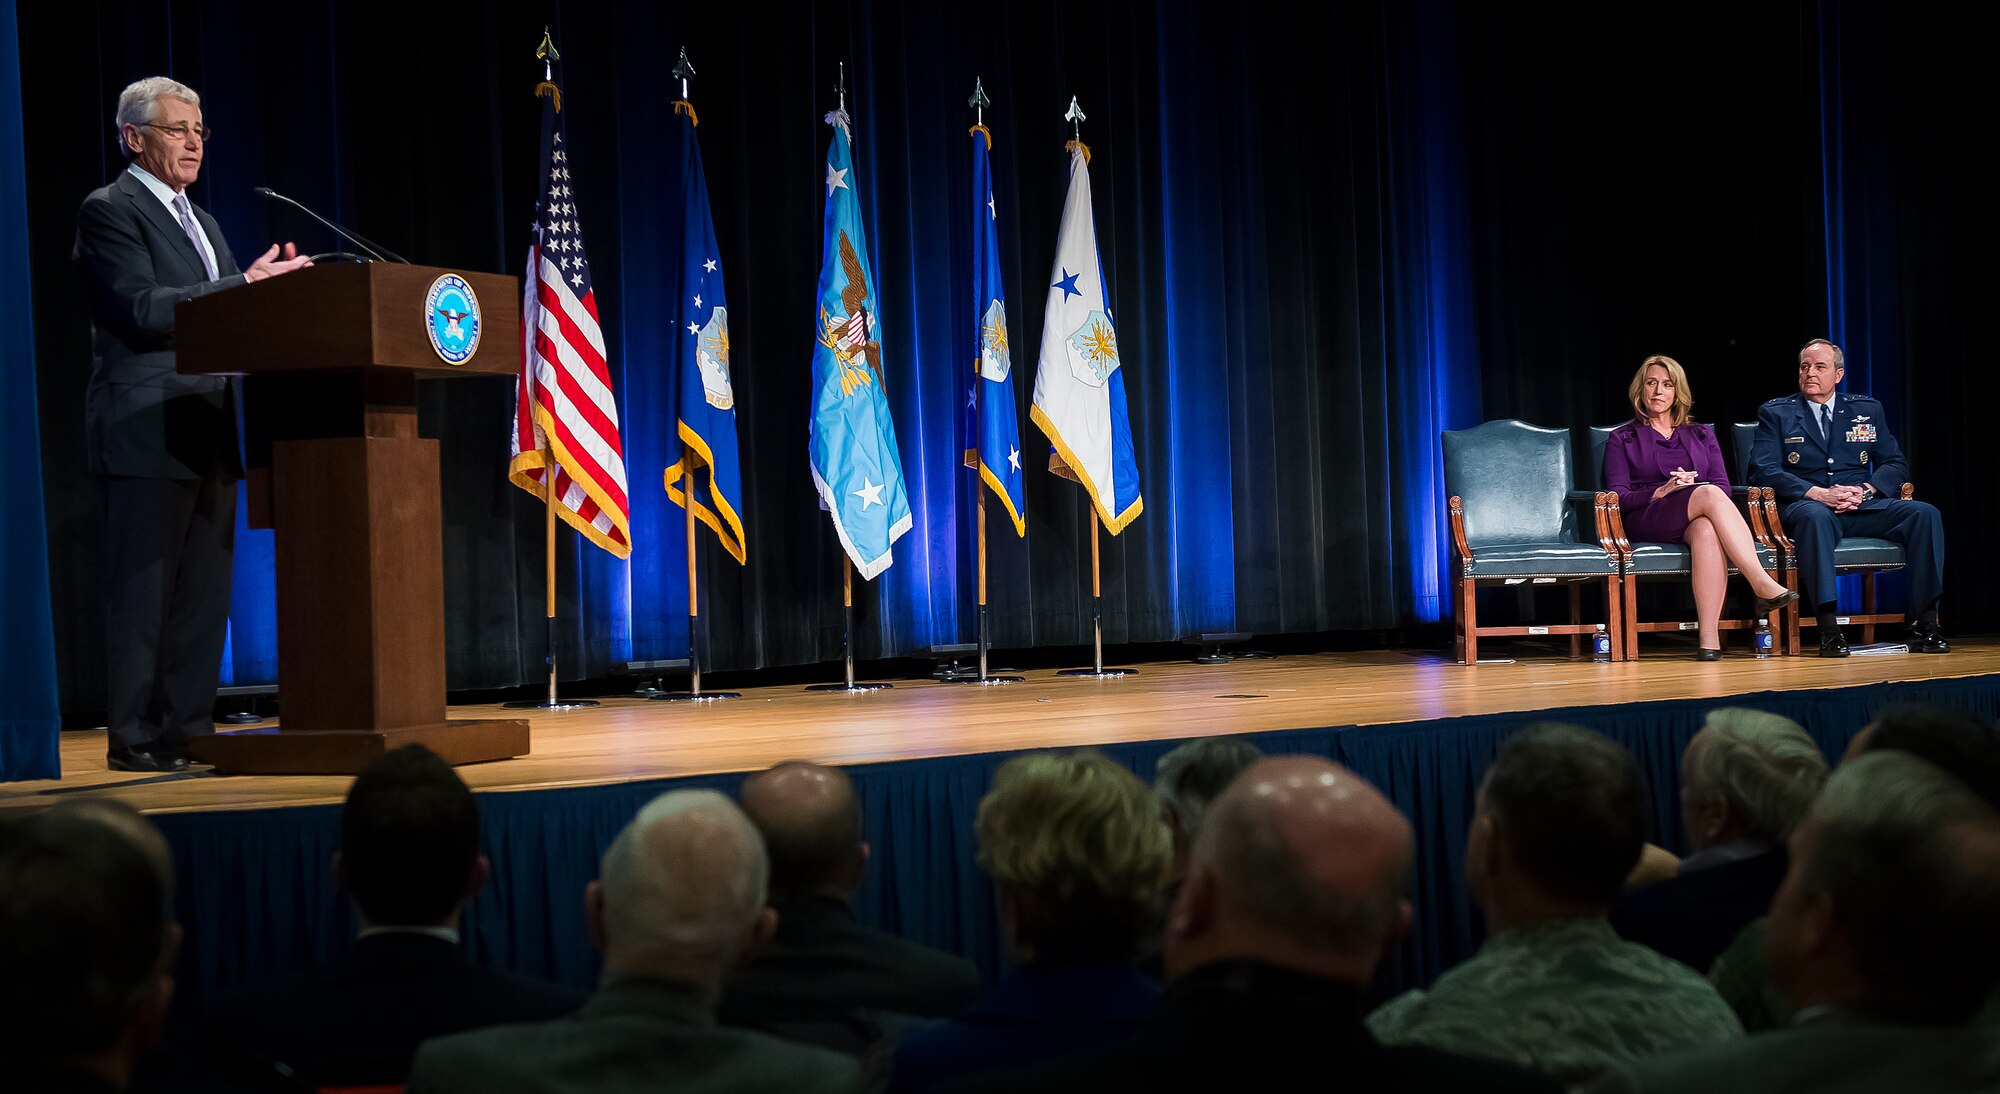 Defense Secretary Chuck Hagel, left, gives his remarks prior to ceremoniously swearing-in Deborah Lee James, second from right, as the 23rd secretary of the Air Force,during a ceremony in the Pentagon, Washington, D.C., Jan. 24, 2014. Seated next to James is Air Force Chief of Staff Gen. Mark A. Welsh III.  (U.S. Air Force photo/Jim Varhegyi)